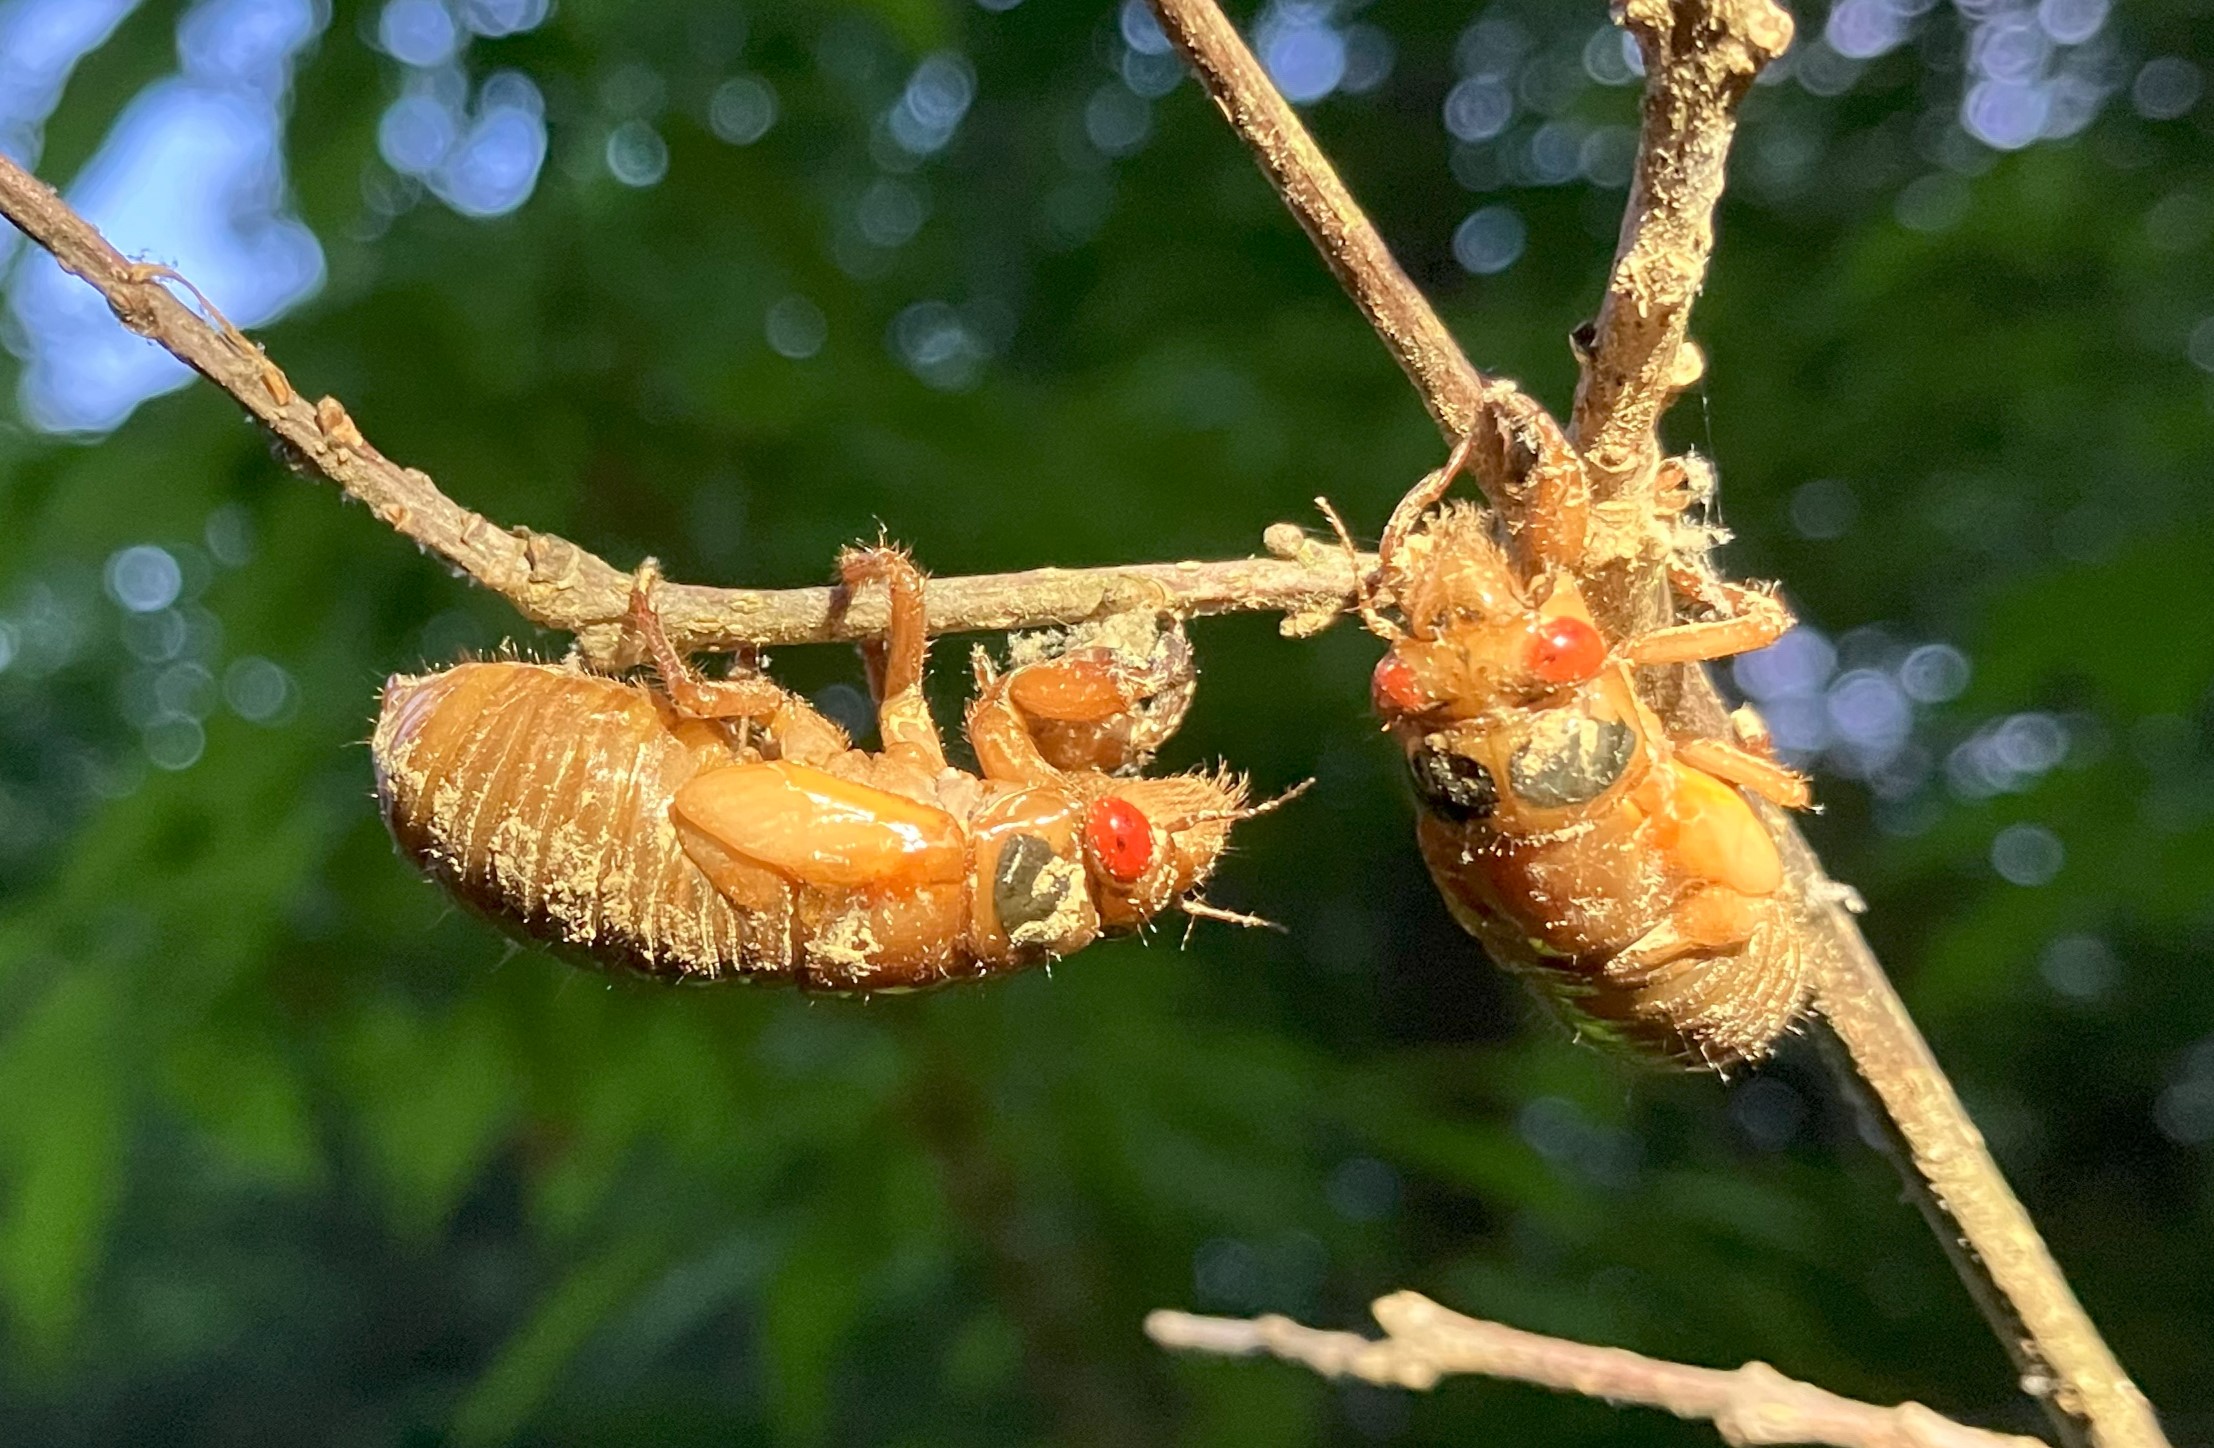 Two cicada nymphs hang face to face from the same twig